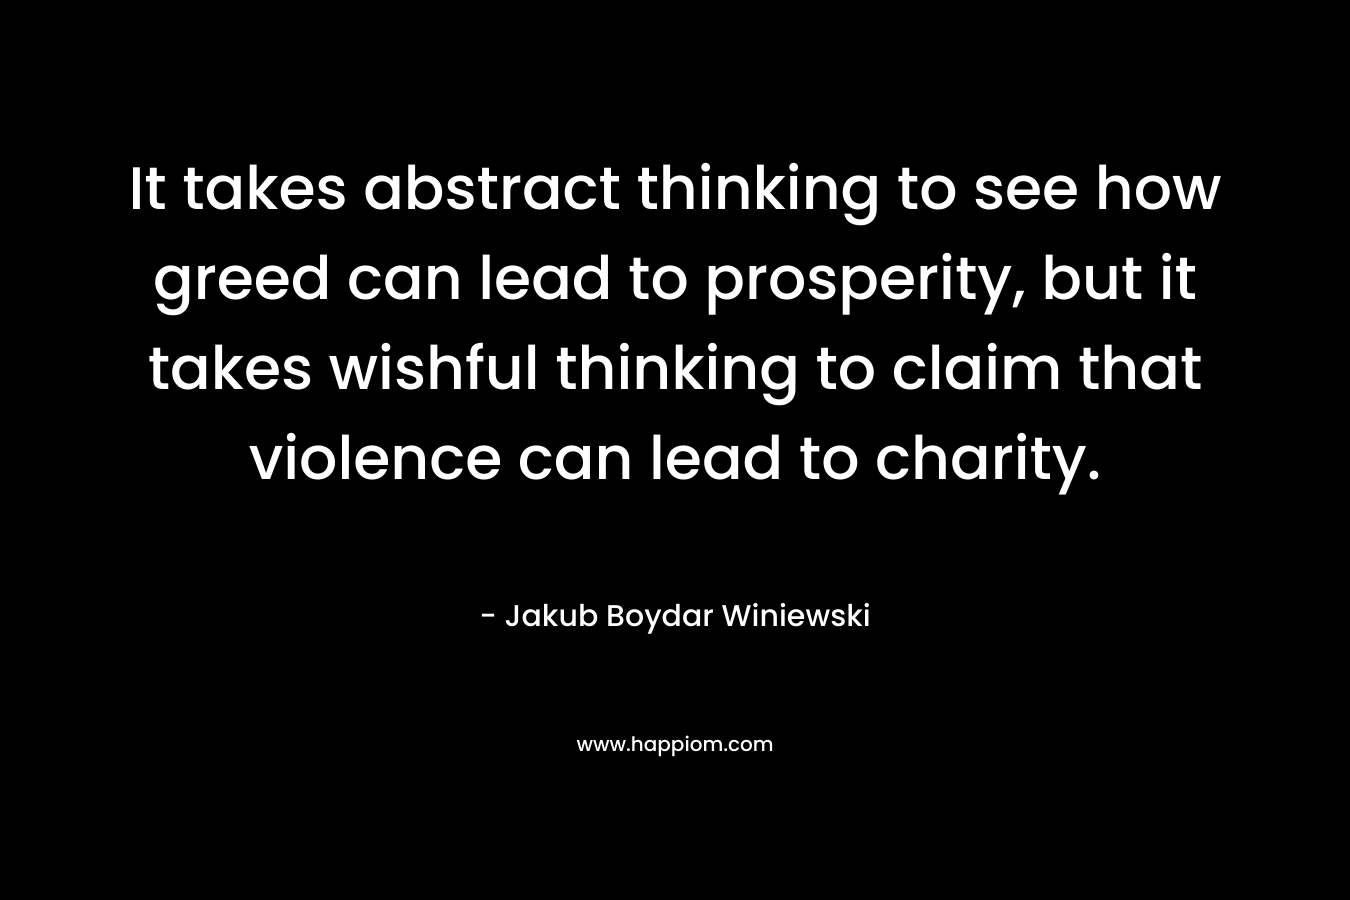 It takes abstract thinking to see how greed can lead to prosperity, but it takes wishful thinking to claim that violence can lead to charity. – Jakub Boydar Winiewski